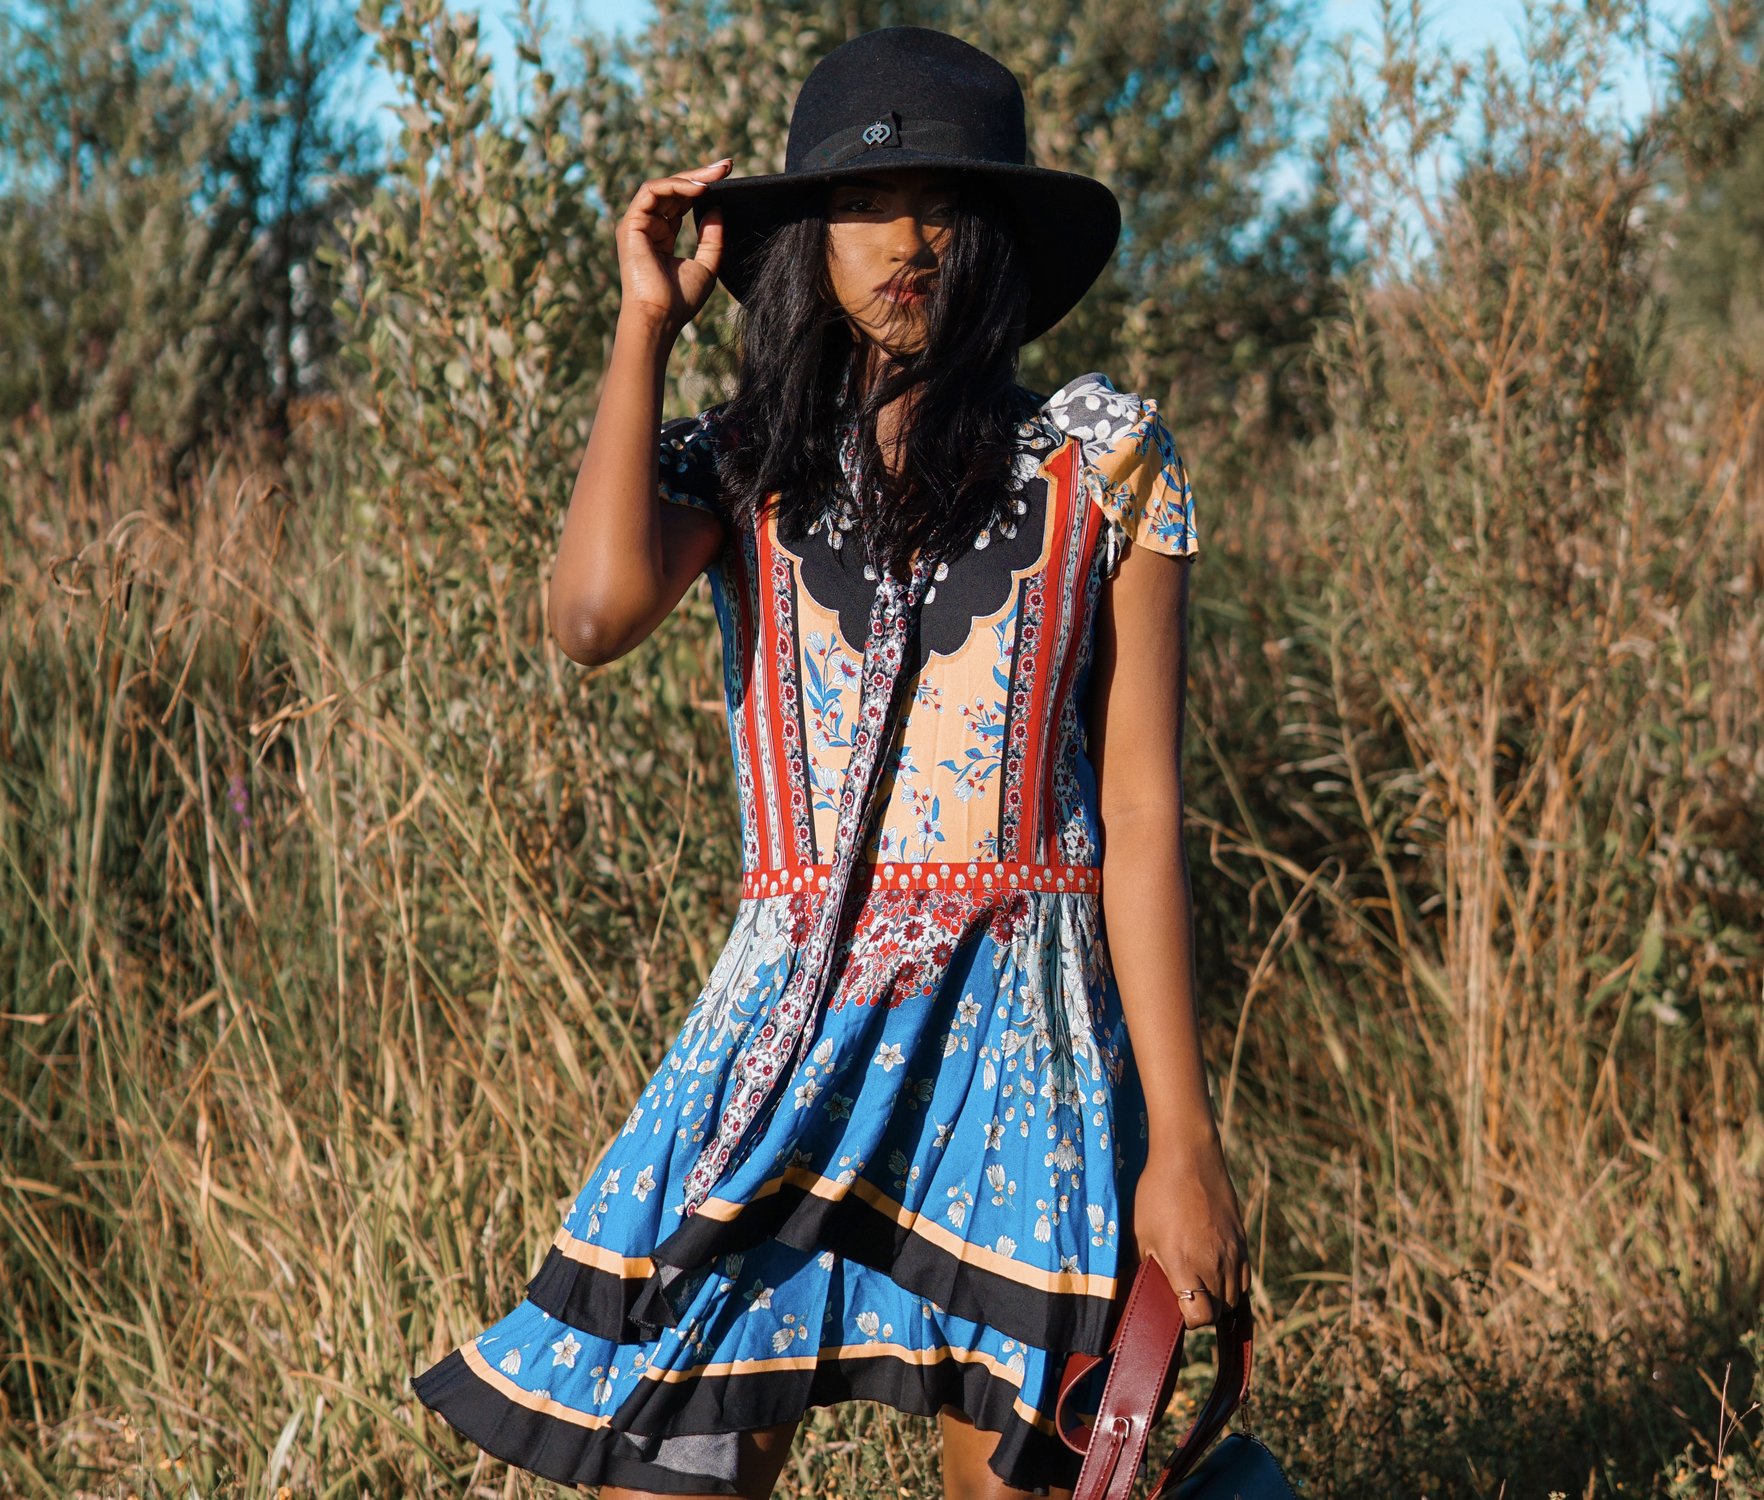 Sachini wearing a Alice and Olivia dress and black hat